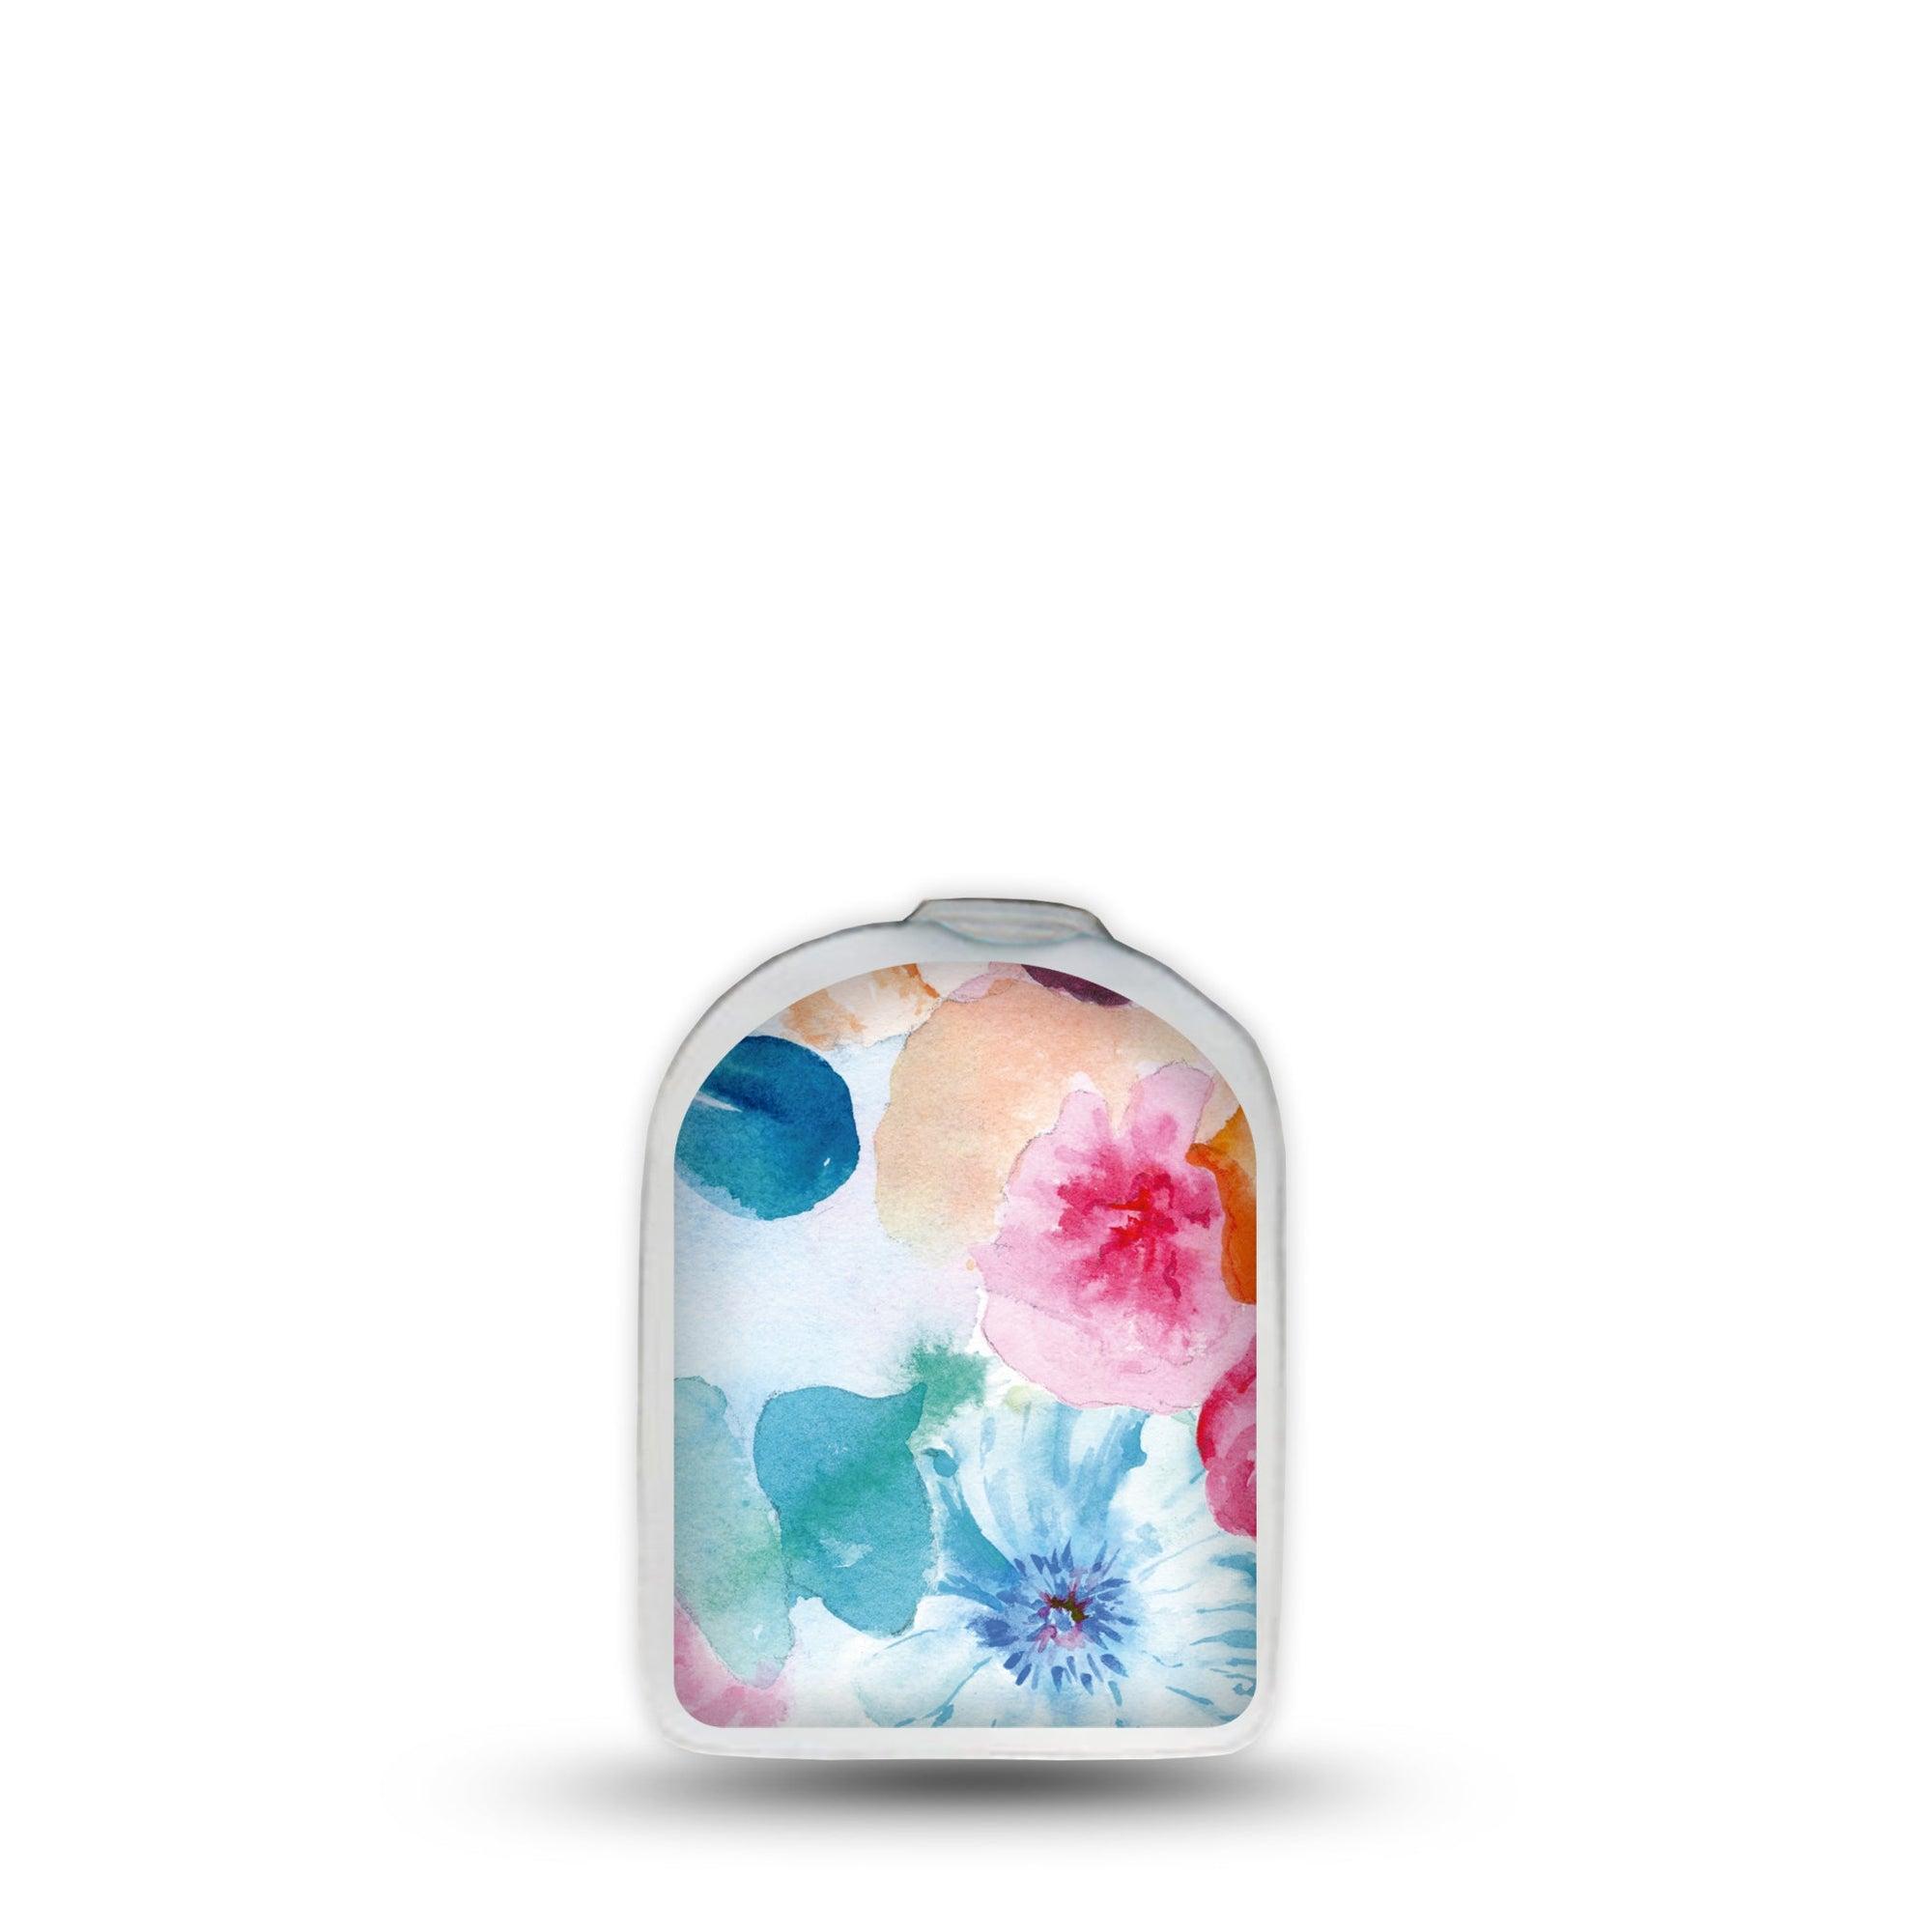 ExpressionMed Watercolor Poppies Omnipod Surface Center Sticker Single Sticker Multicolored Florals Themed Vinyl Decoration Pump Design